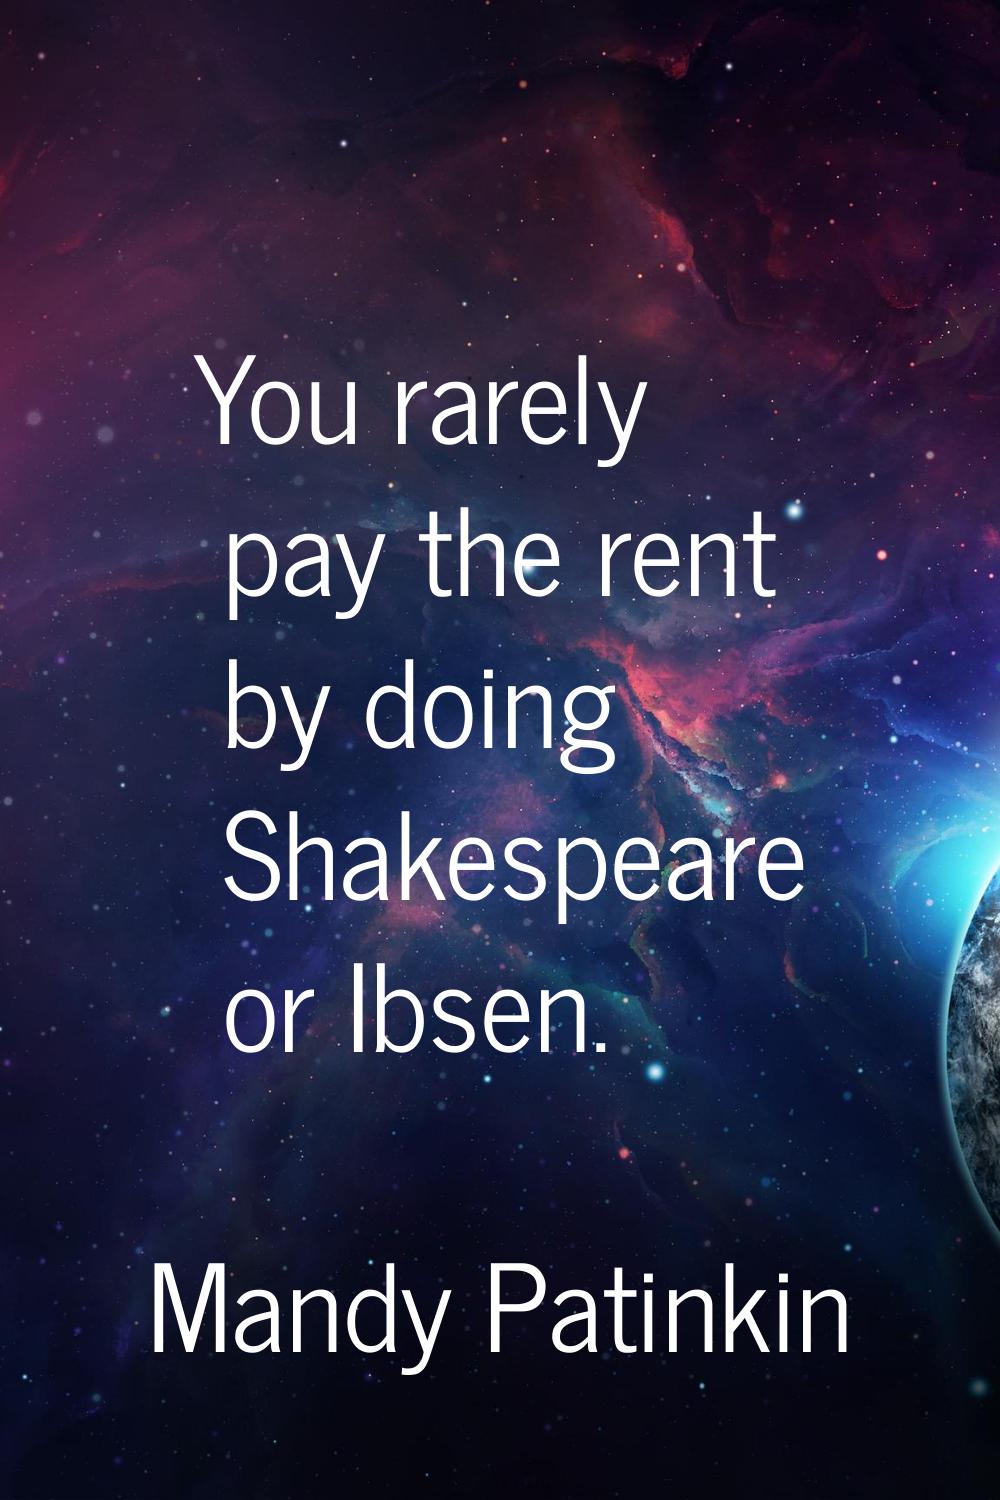 You rarely pay the rent by doing Shakespeare or Ibsen.